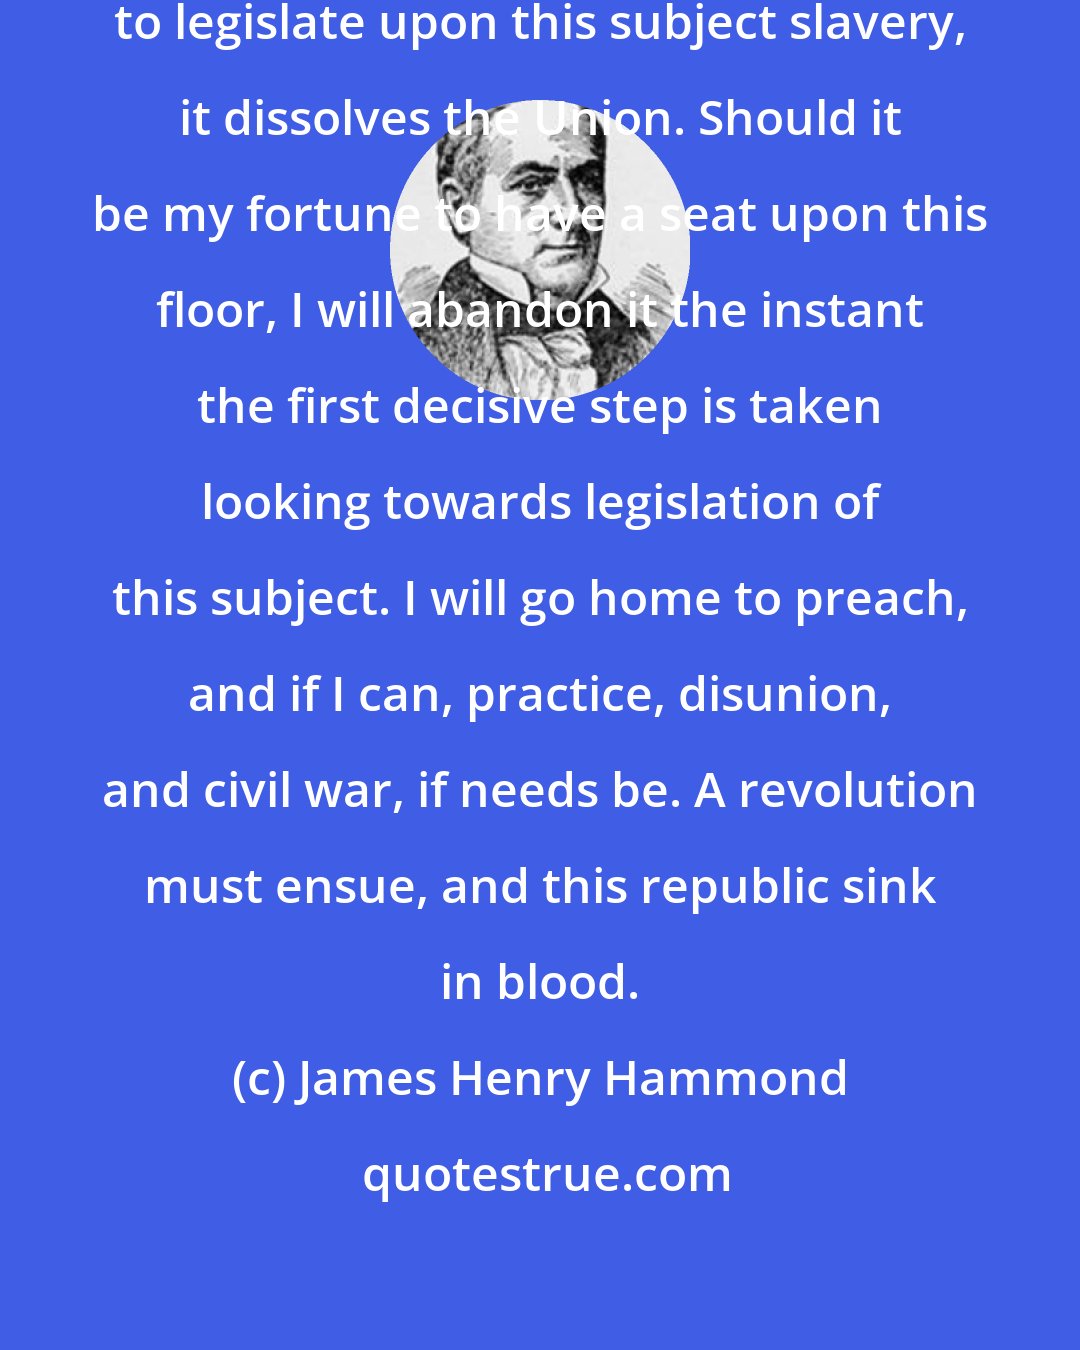 James Henry Hammond: The moment this House undertakes to legislate upon this subject slavery, it dissolves the Union. Should it be my fortune to have a seat upon this floor, I will abandon it the instant the first decisive step is taken looking towards legislation of this subject. I will go home to preach, and if I can, practice, disunion, and civil war, if needs be. A revolution must ensue, and this republic sink in blood.